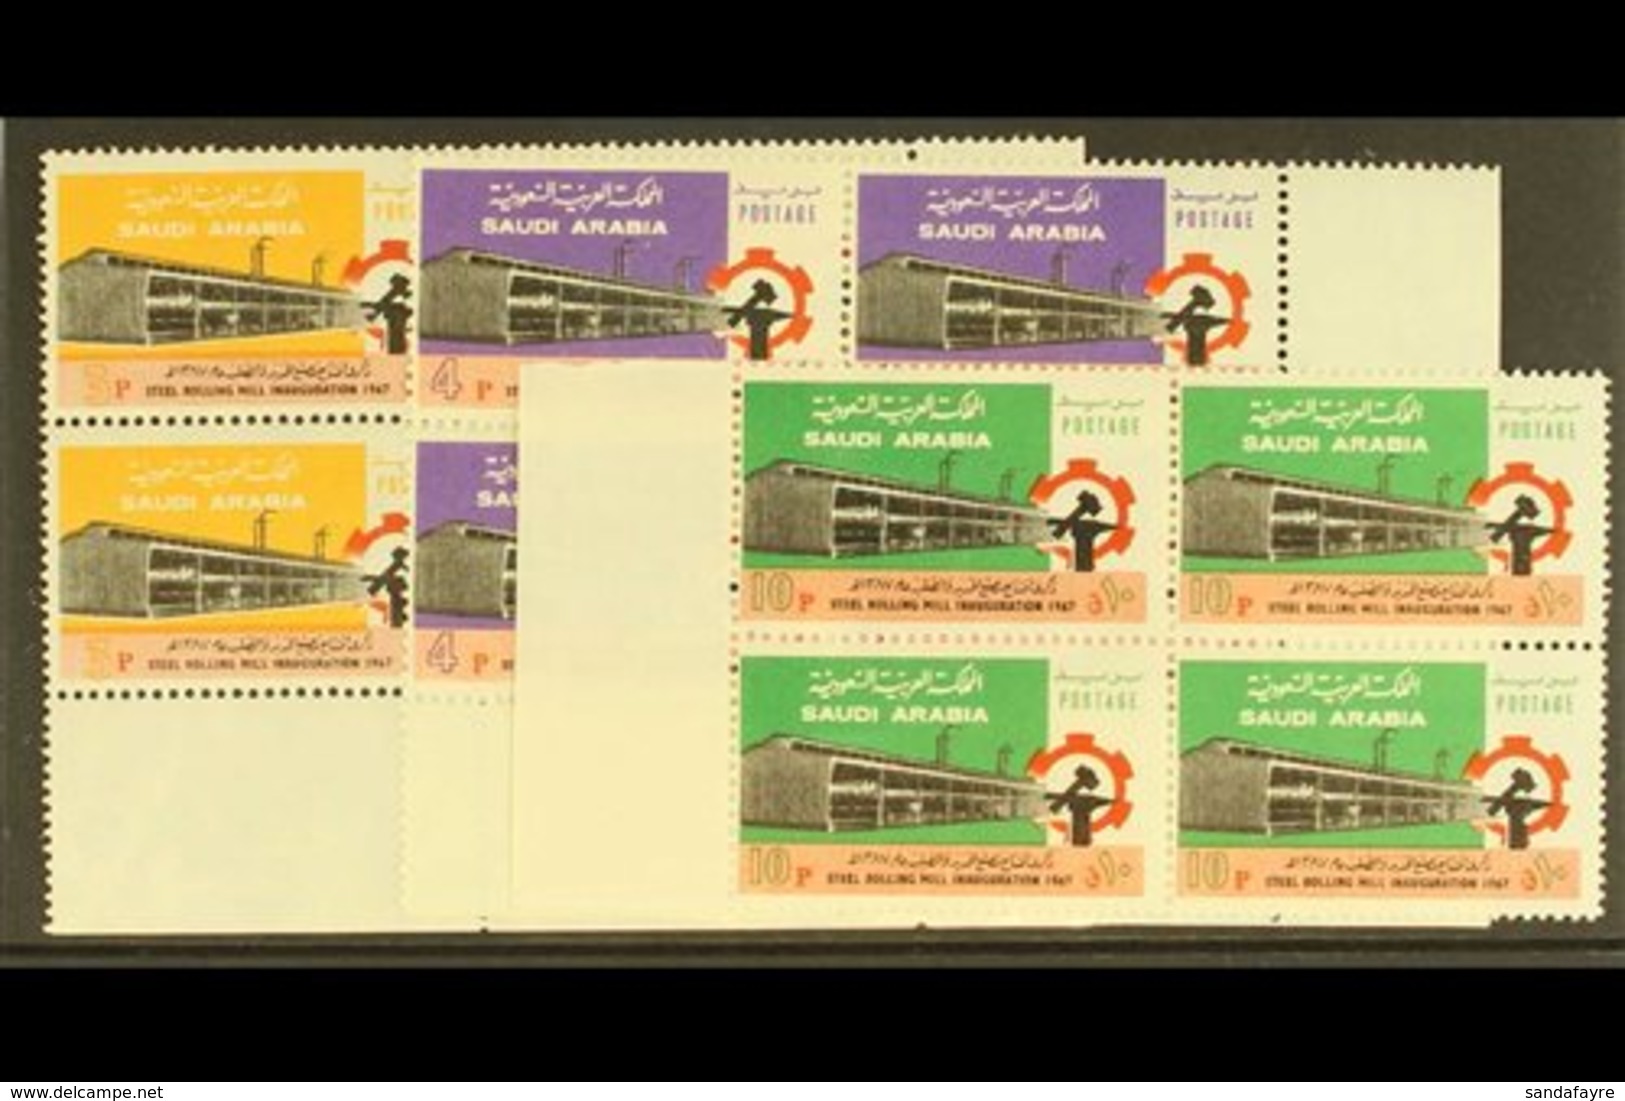 1970 Steel Mill Set Complete, SG 1037/9, In Very Fine Never Hinged Marginal Mint Blocks Of 4. (12 Stamps) For More Image - Saudi Arabia